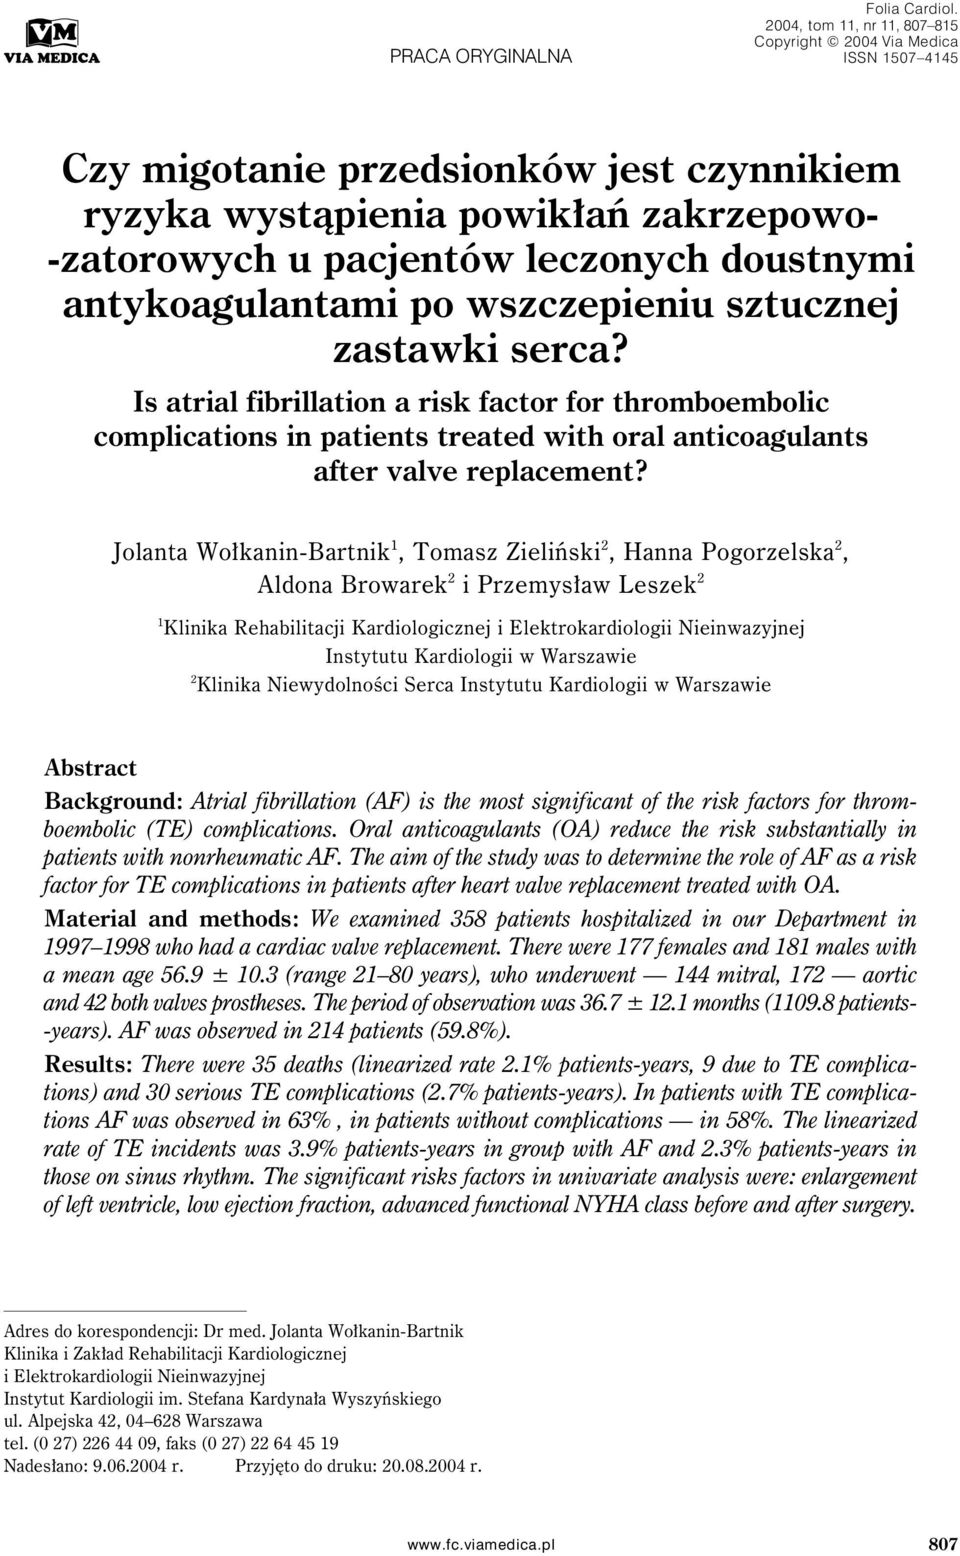 antykoagulantami po wszczepieniu sztucznej zastawki serca? Is atrial fibrillation a risk factor for thromboembolic complications in patients treated with oral anticoagulants after valve replacement?